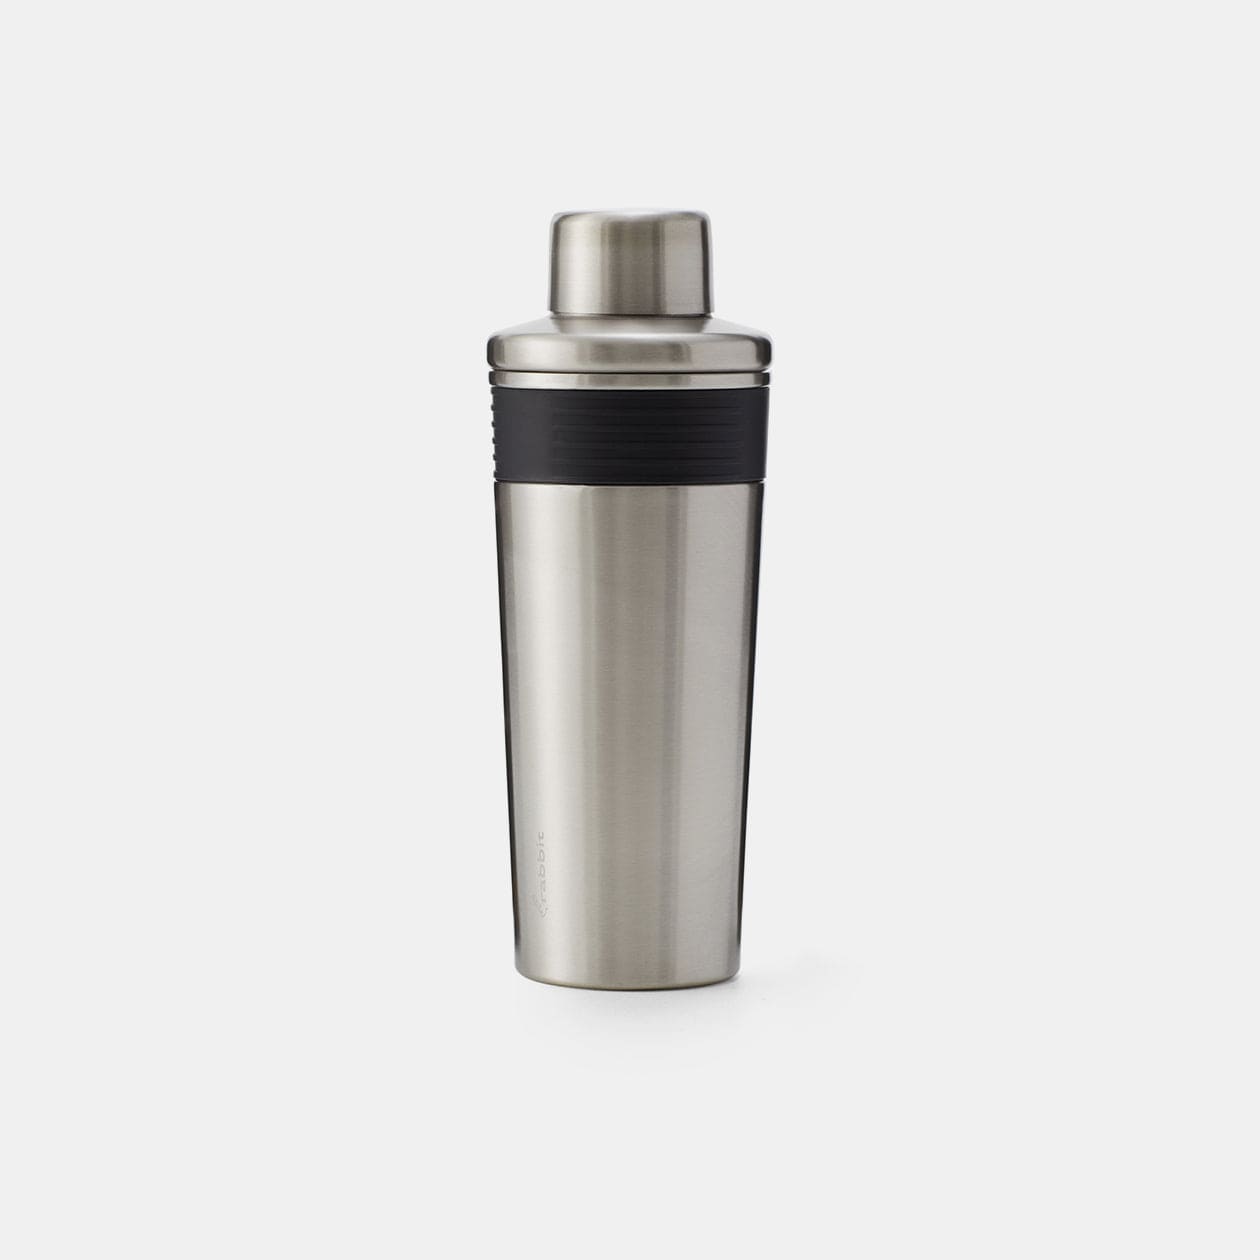 18 oz Stainless Steel Cocktail Shaker - Stainless Steel